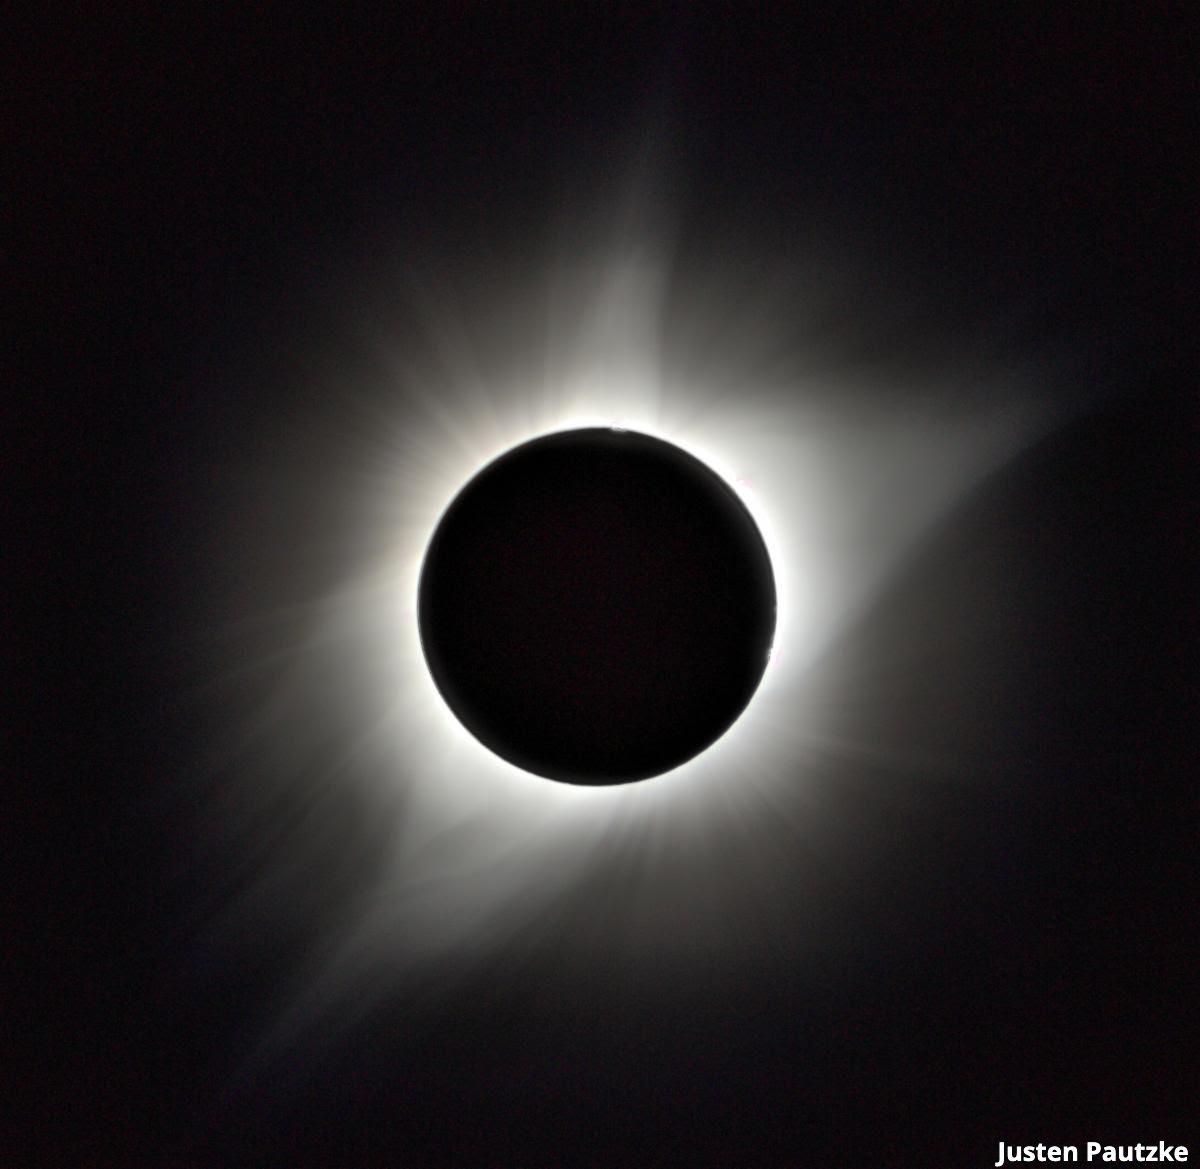 An image of the total solar eclipse showing the glowing coronal layer around the black disc of the moon, by Justen Pautzke